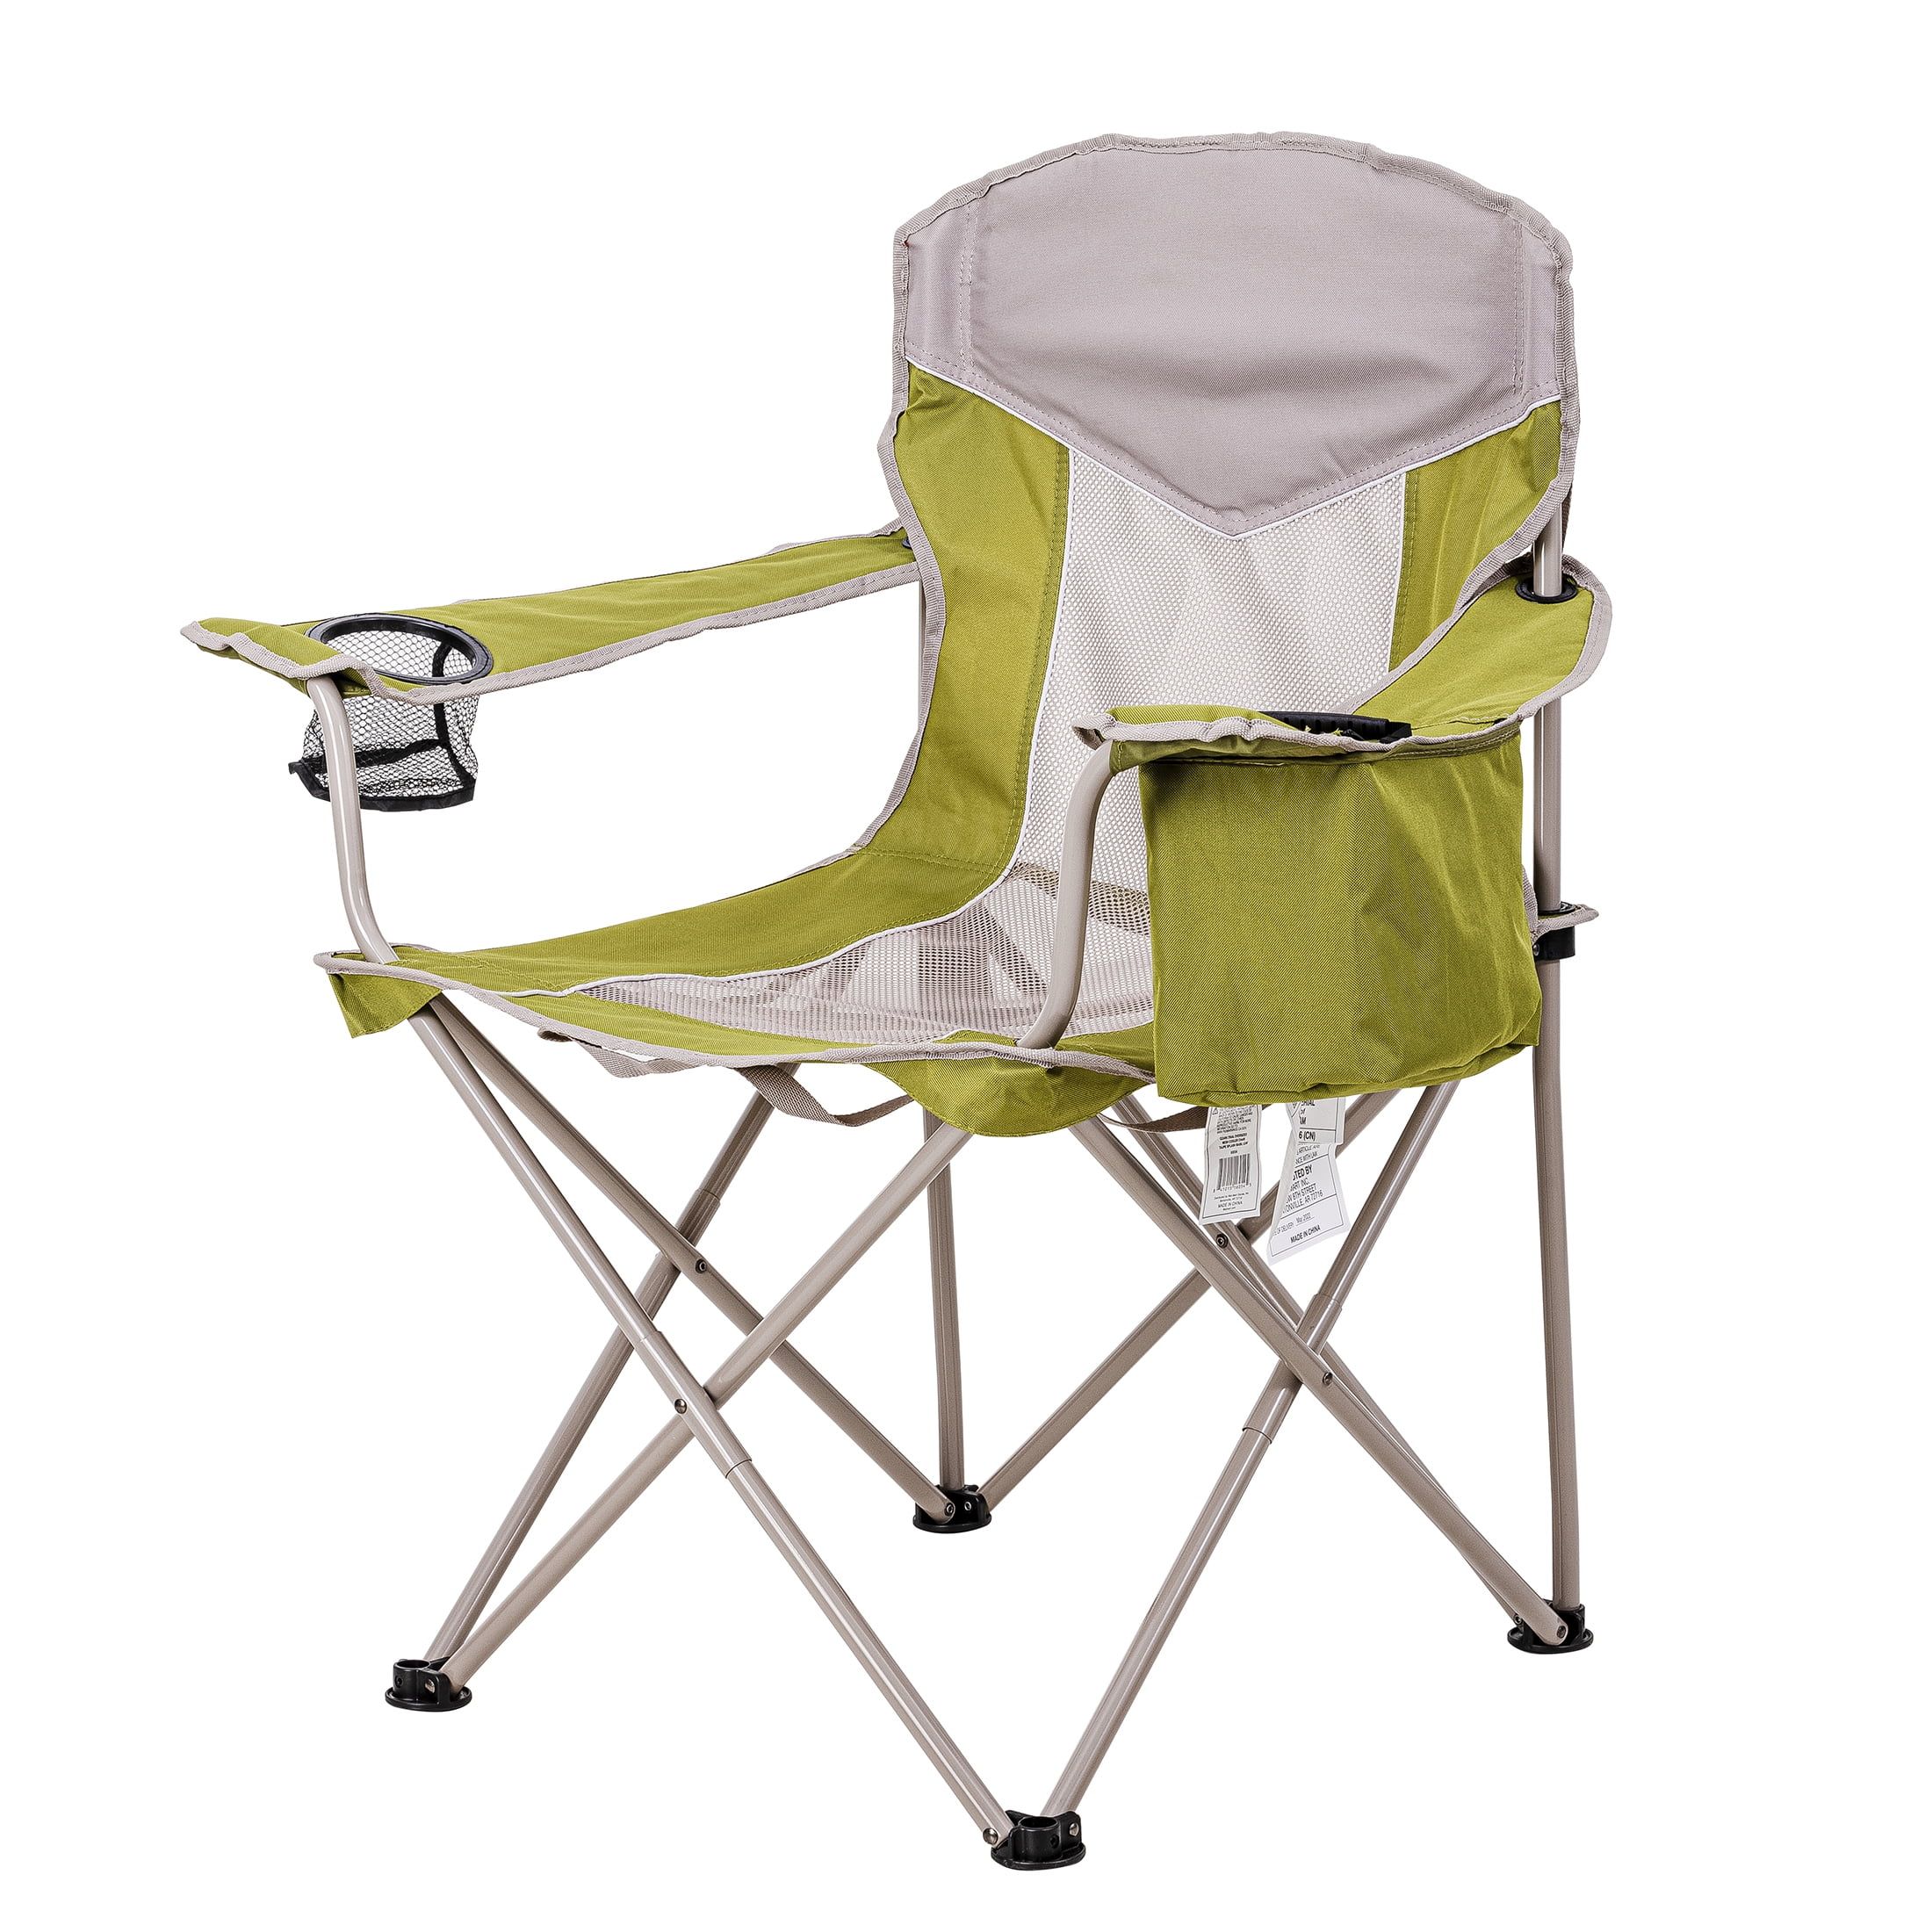 Ozark Trail Oversized Mesh Camp Chair with Cooler, Basil Leaf and Taupe, Green and Grey, Adult | Walmart (US)